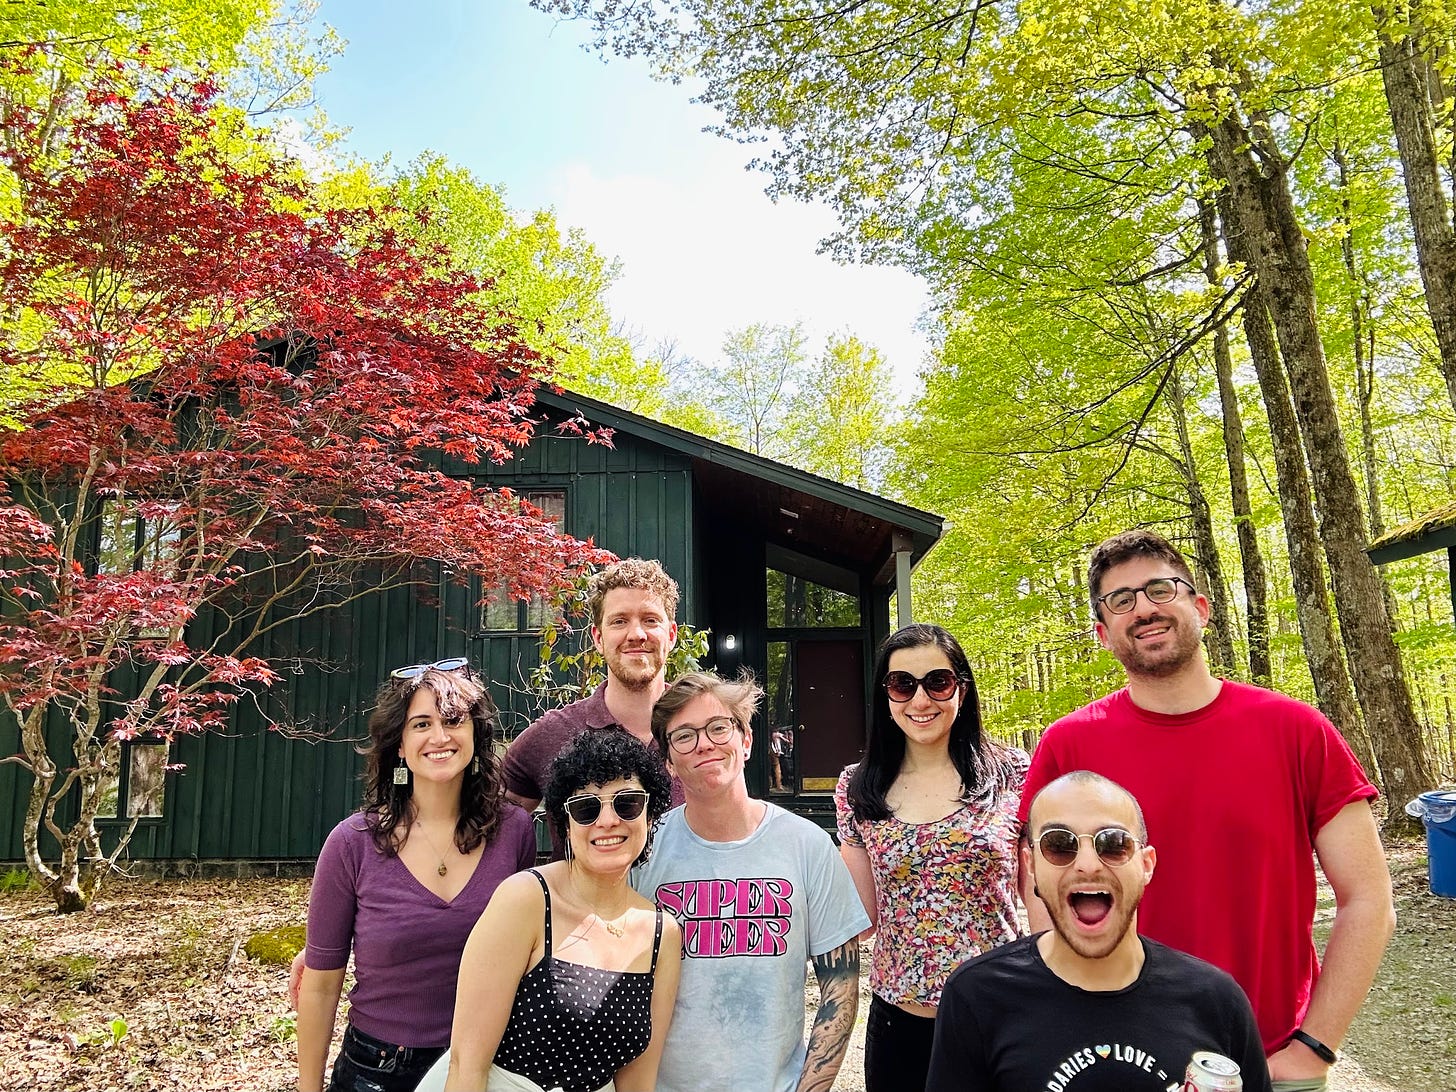 A group of people smile at the camera standing in two lines in front of a blue house surrounded by trees